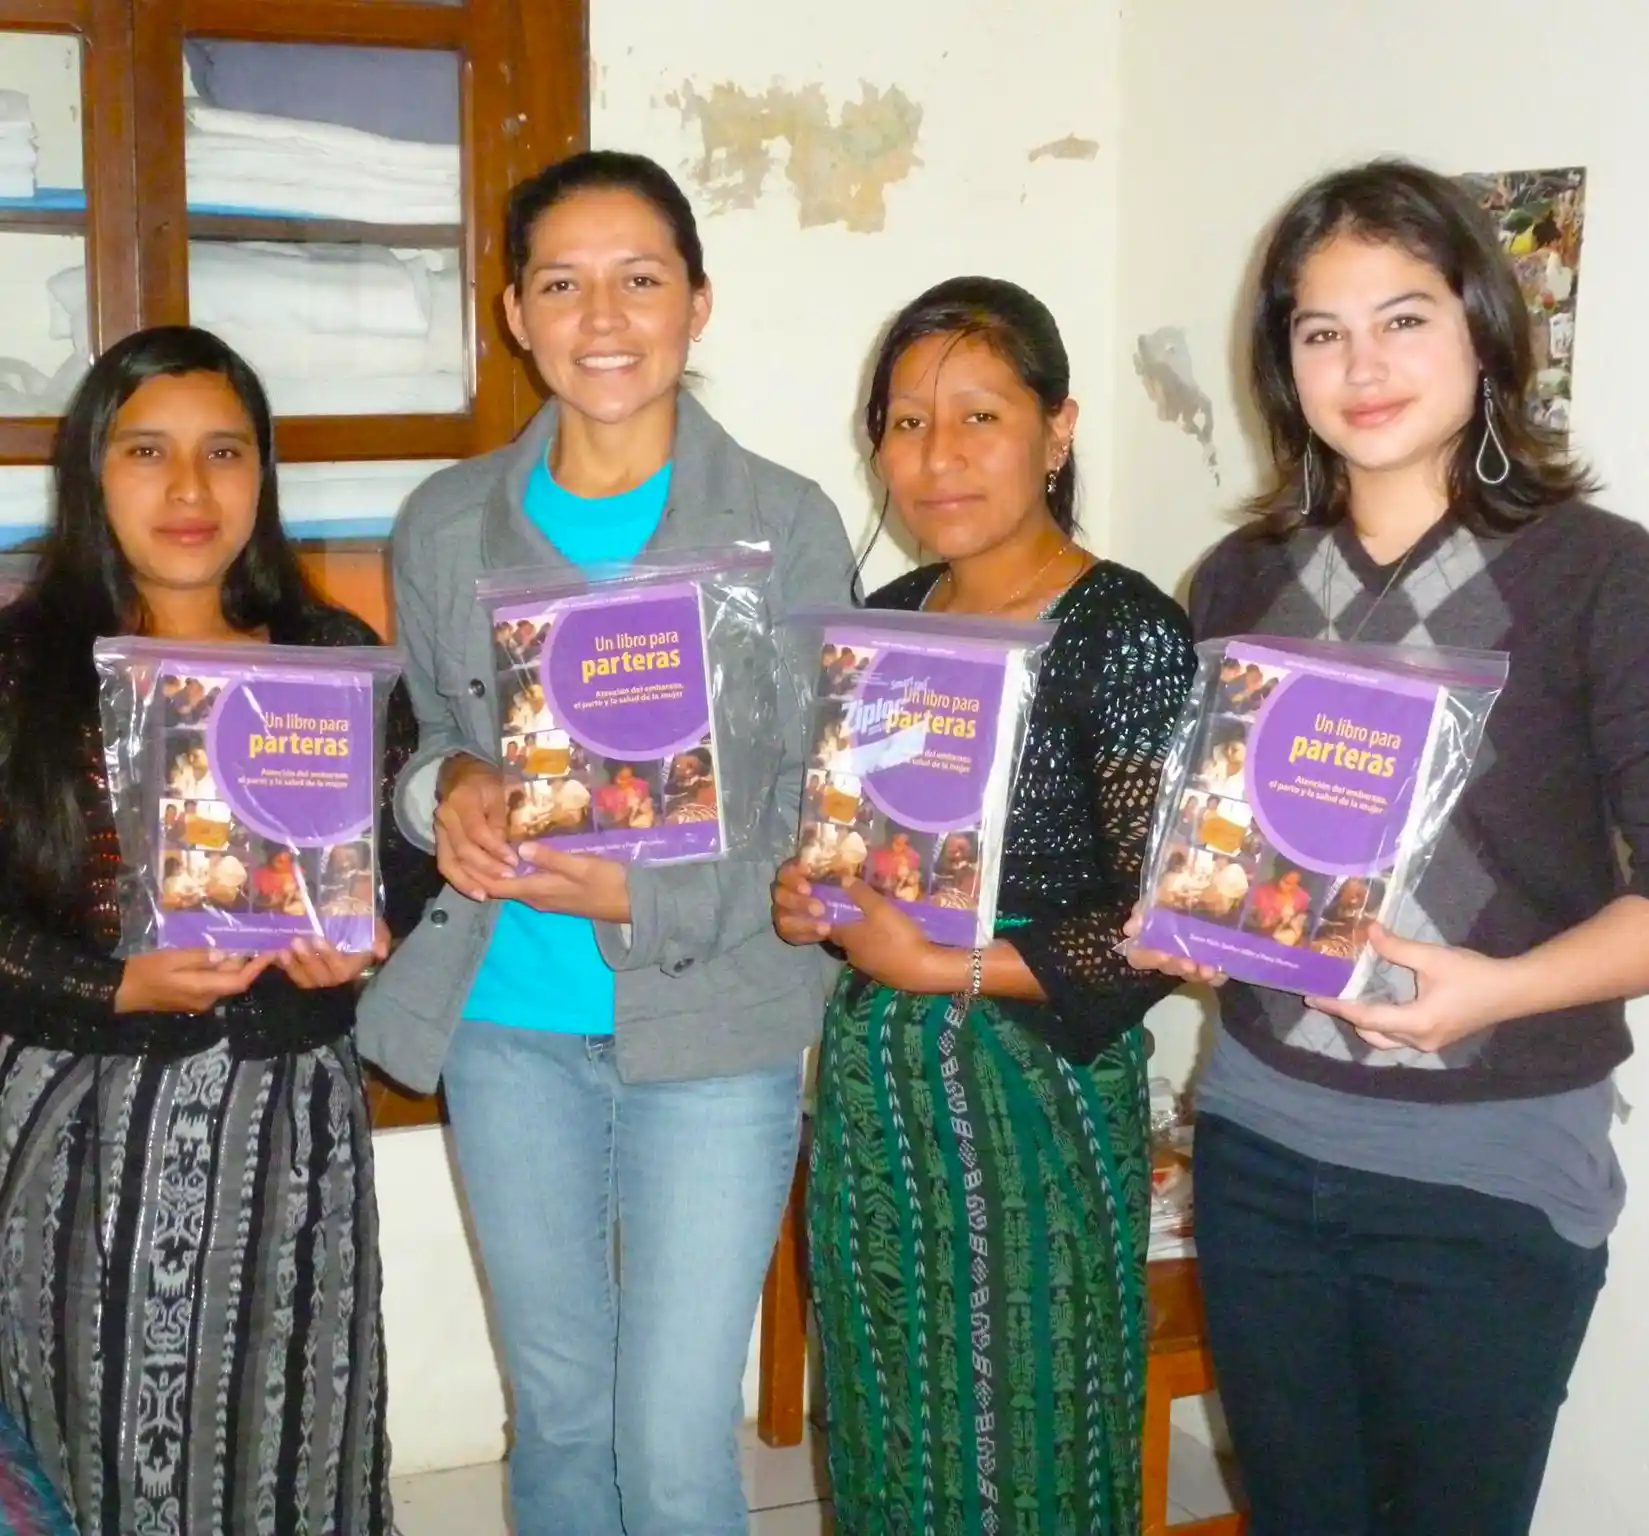 A group of women training to be midwives in Guatemala hold up their gratis copies of A Book for Midwives for the camera.